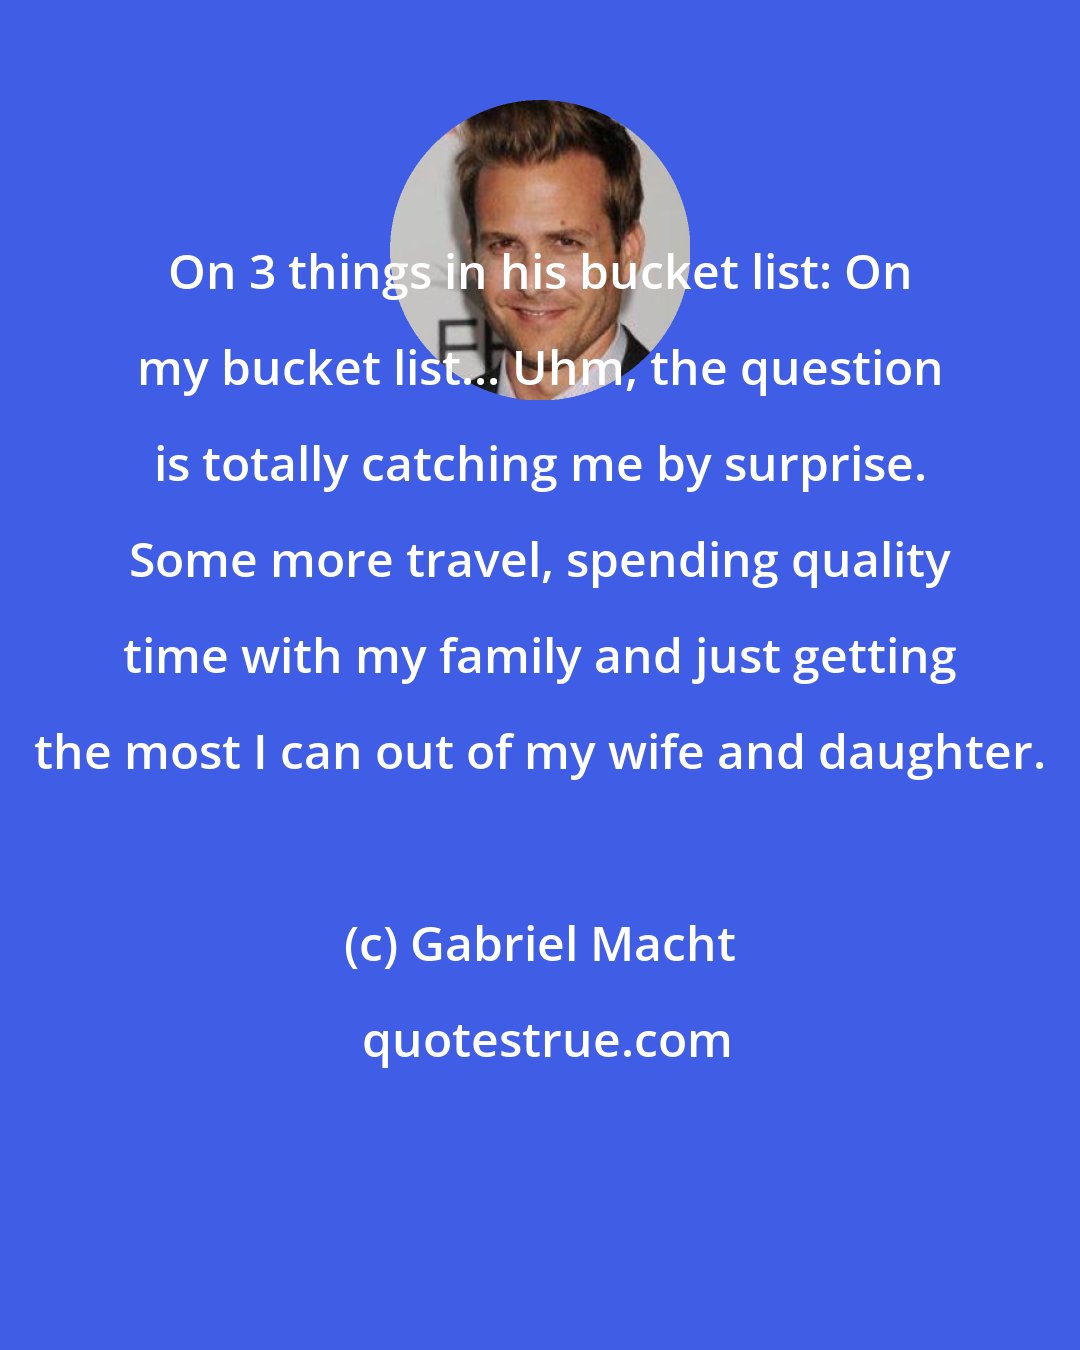 Gabriel Macht: On 3 things in his bucket list: On my bucket list... Uhm, the question is totally catching me by surprise. Some more travel, spending quality time with my family and just getting the most I can out of my wife and daughter.